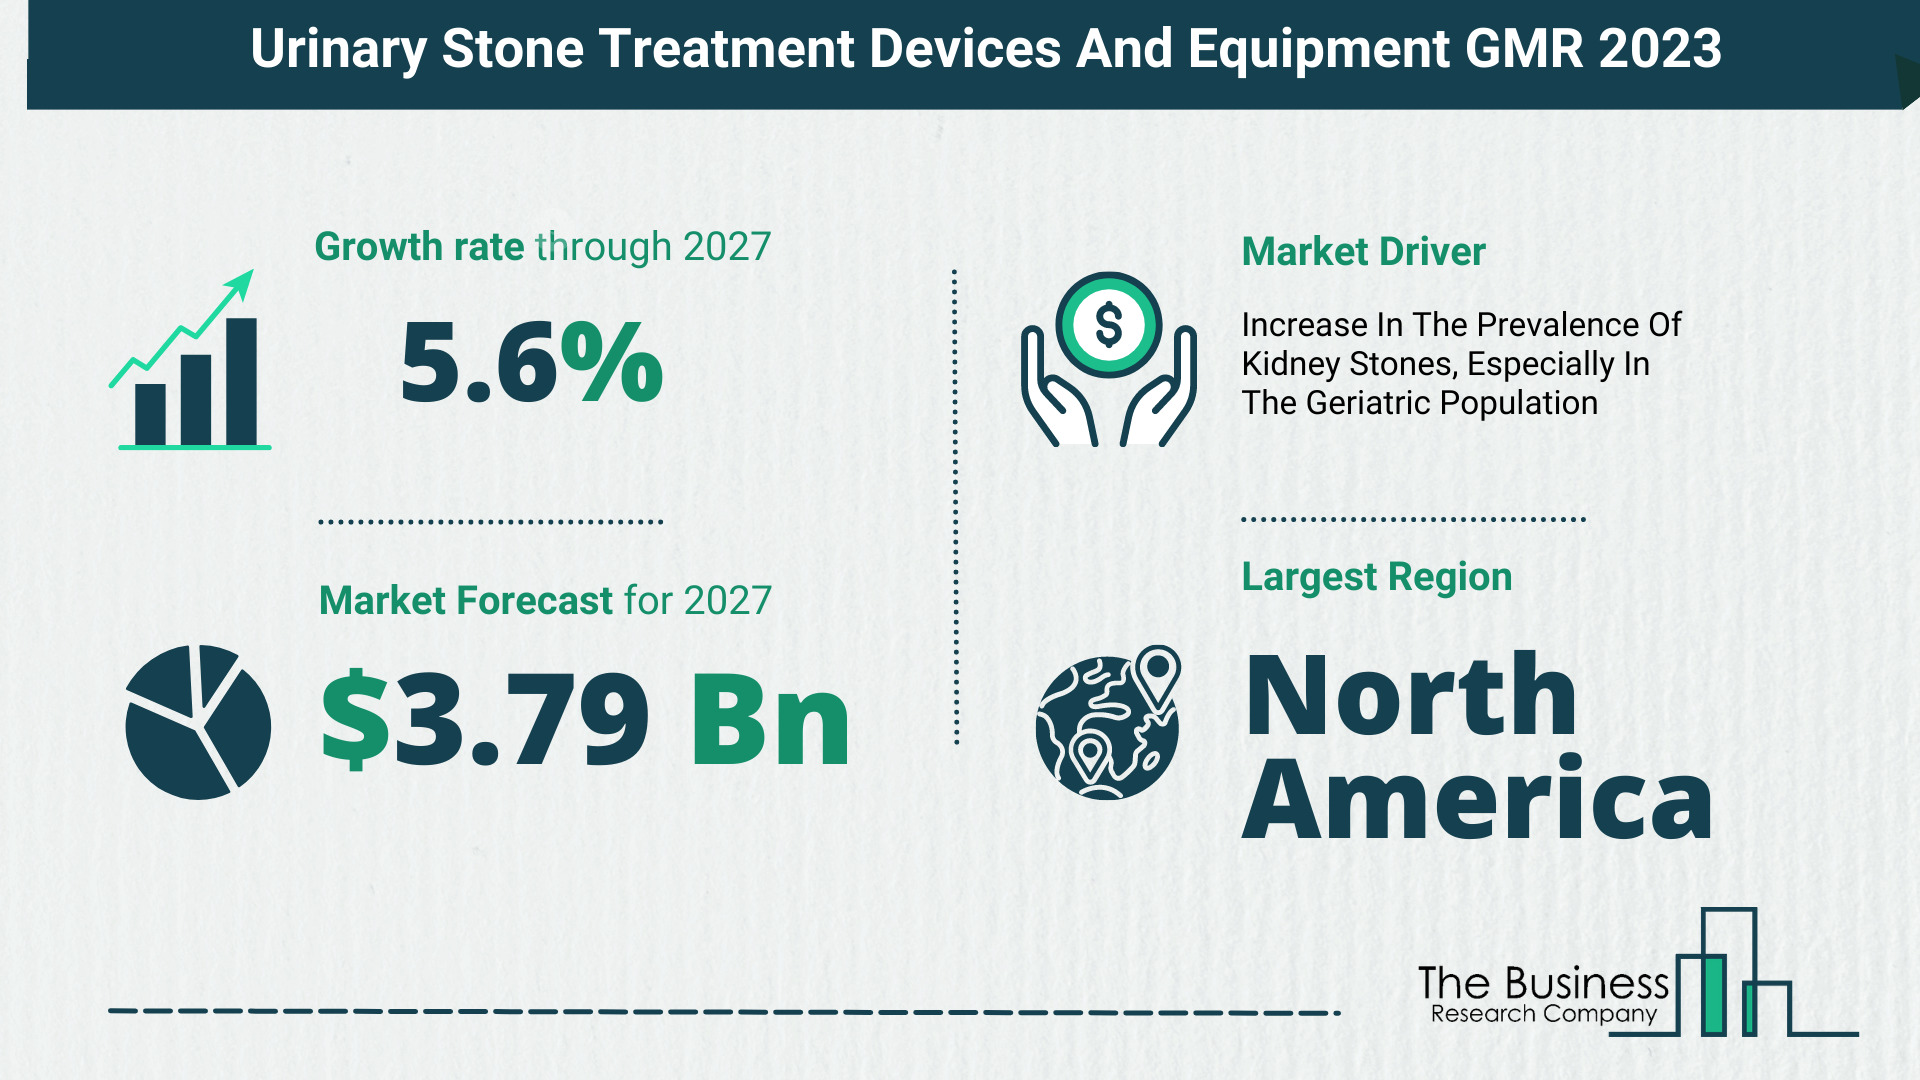 Global Urinary Stone Treatment Devices And Equipment Market Size